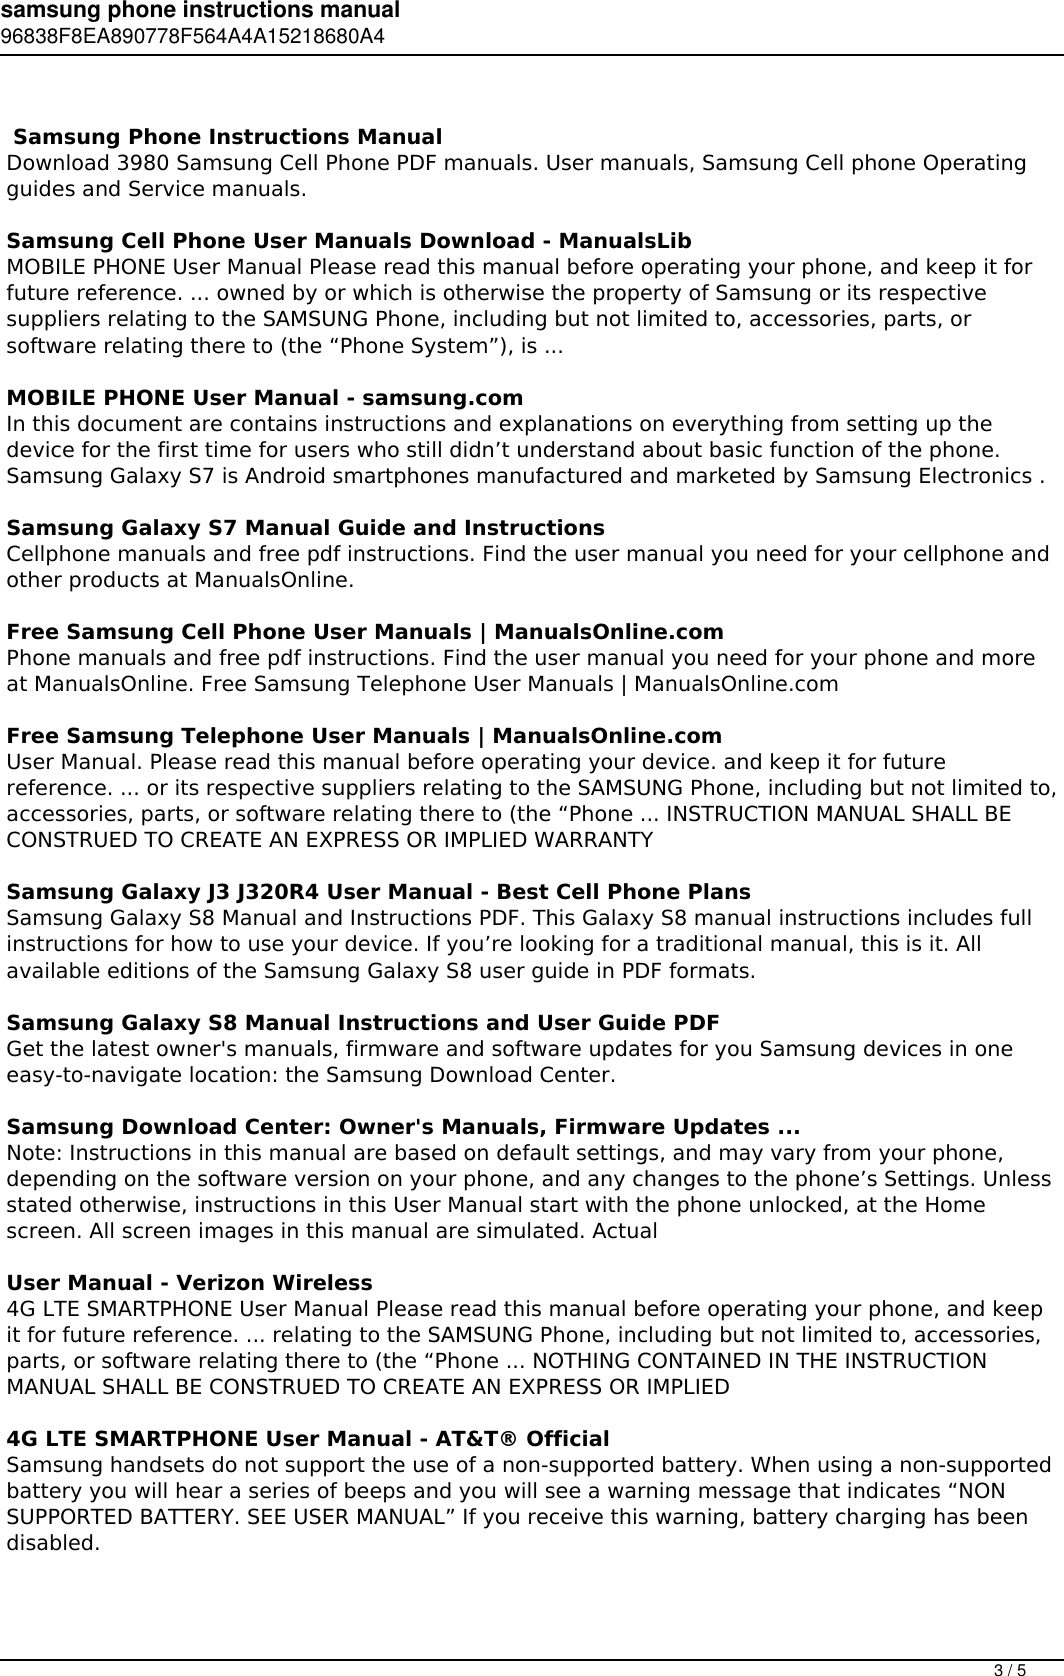 Page 3 of 5 - Samsung Phone Instructions Manual